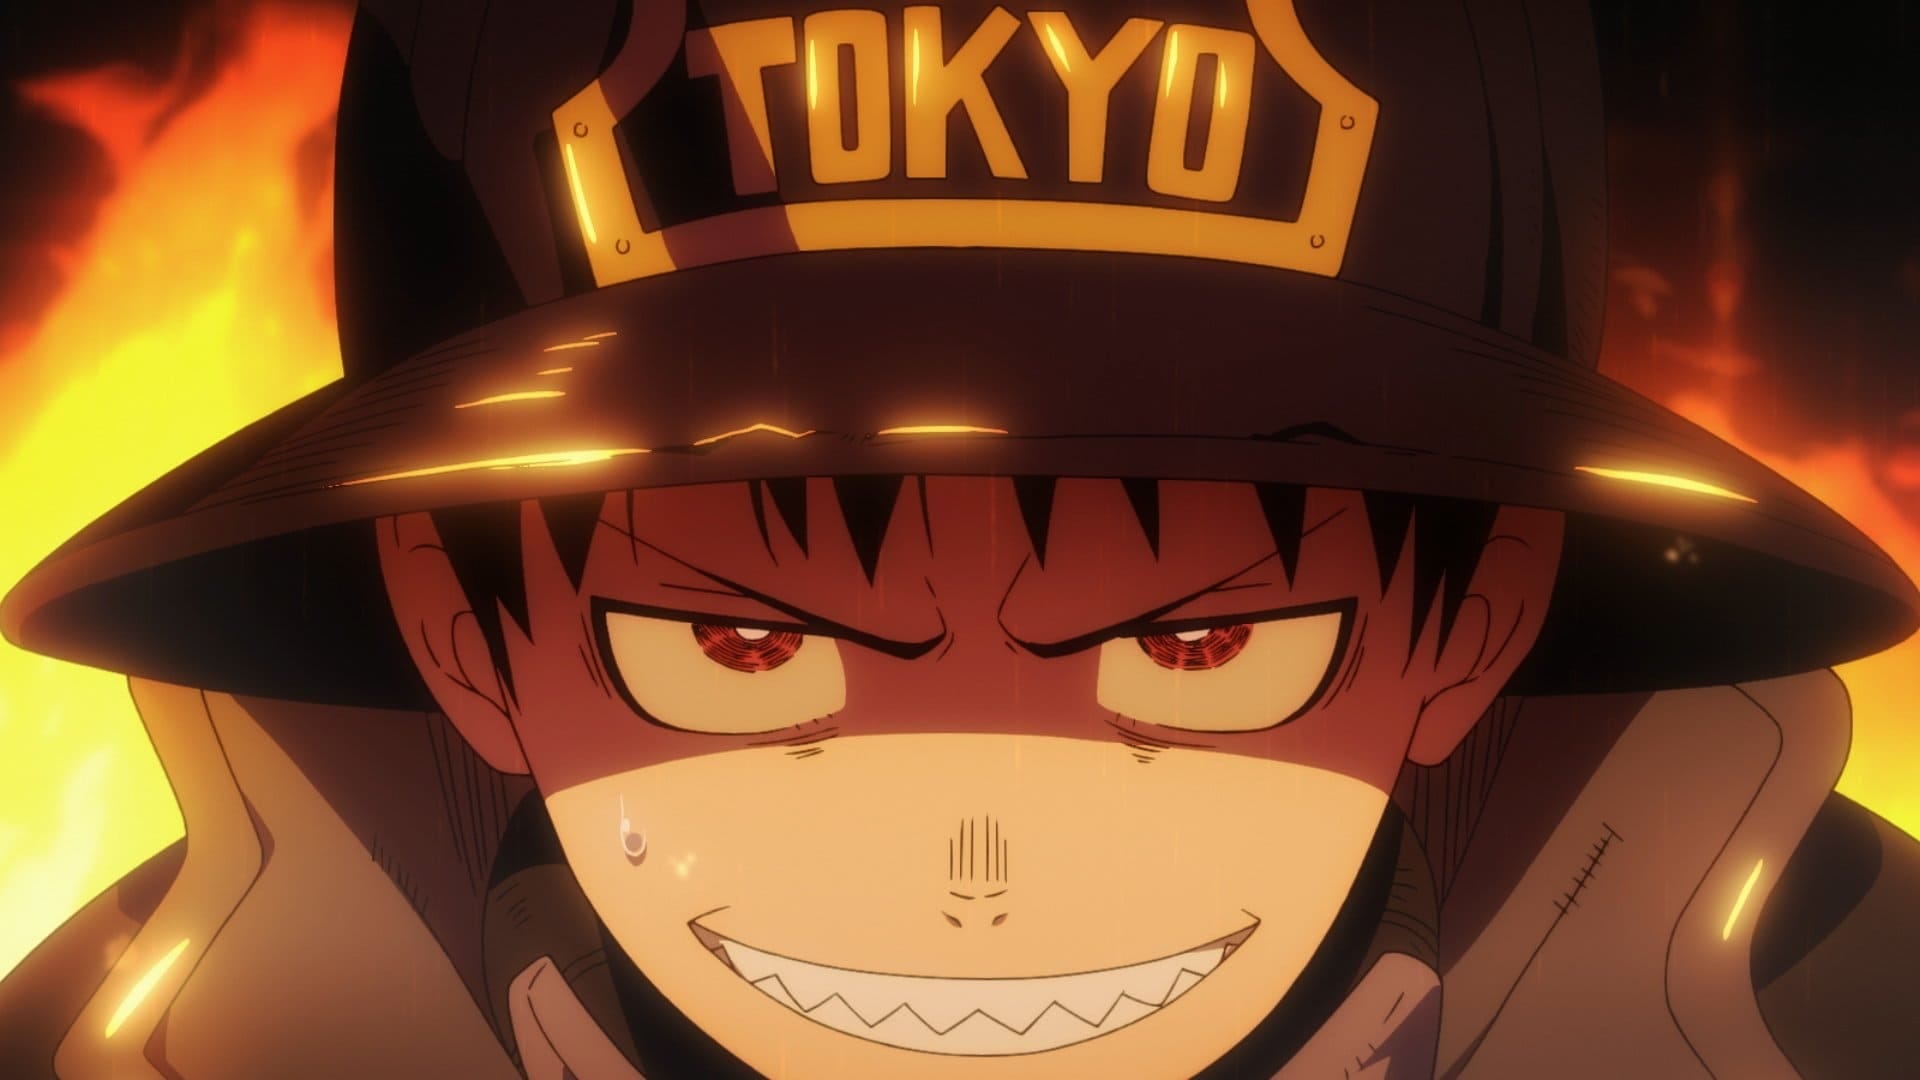 Fire Force Episode 1